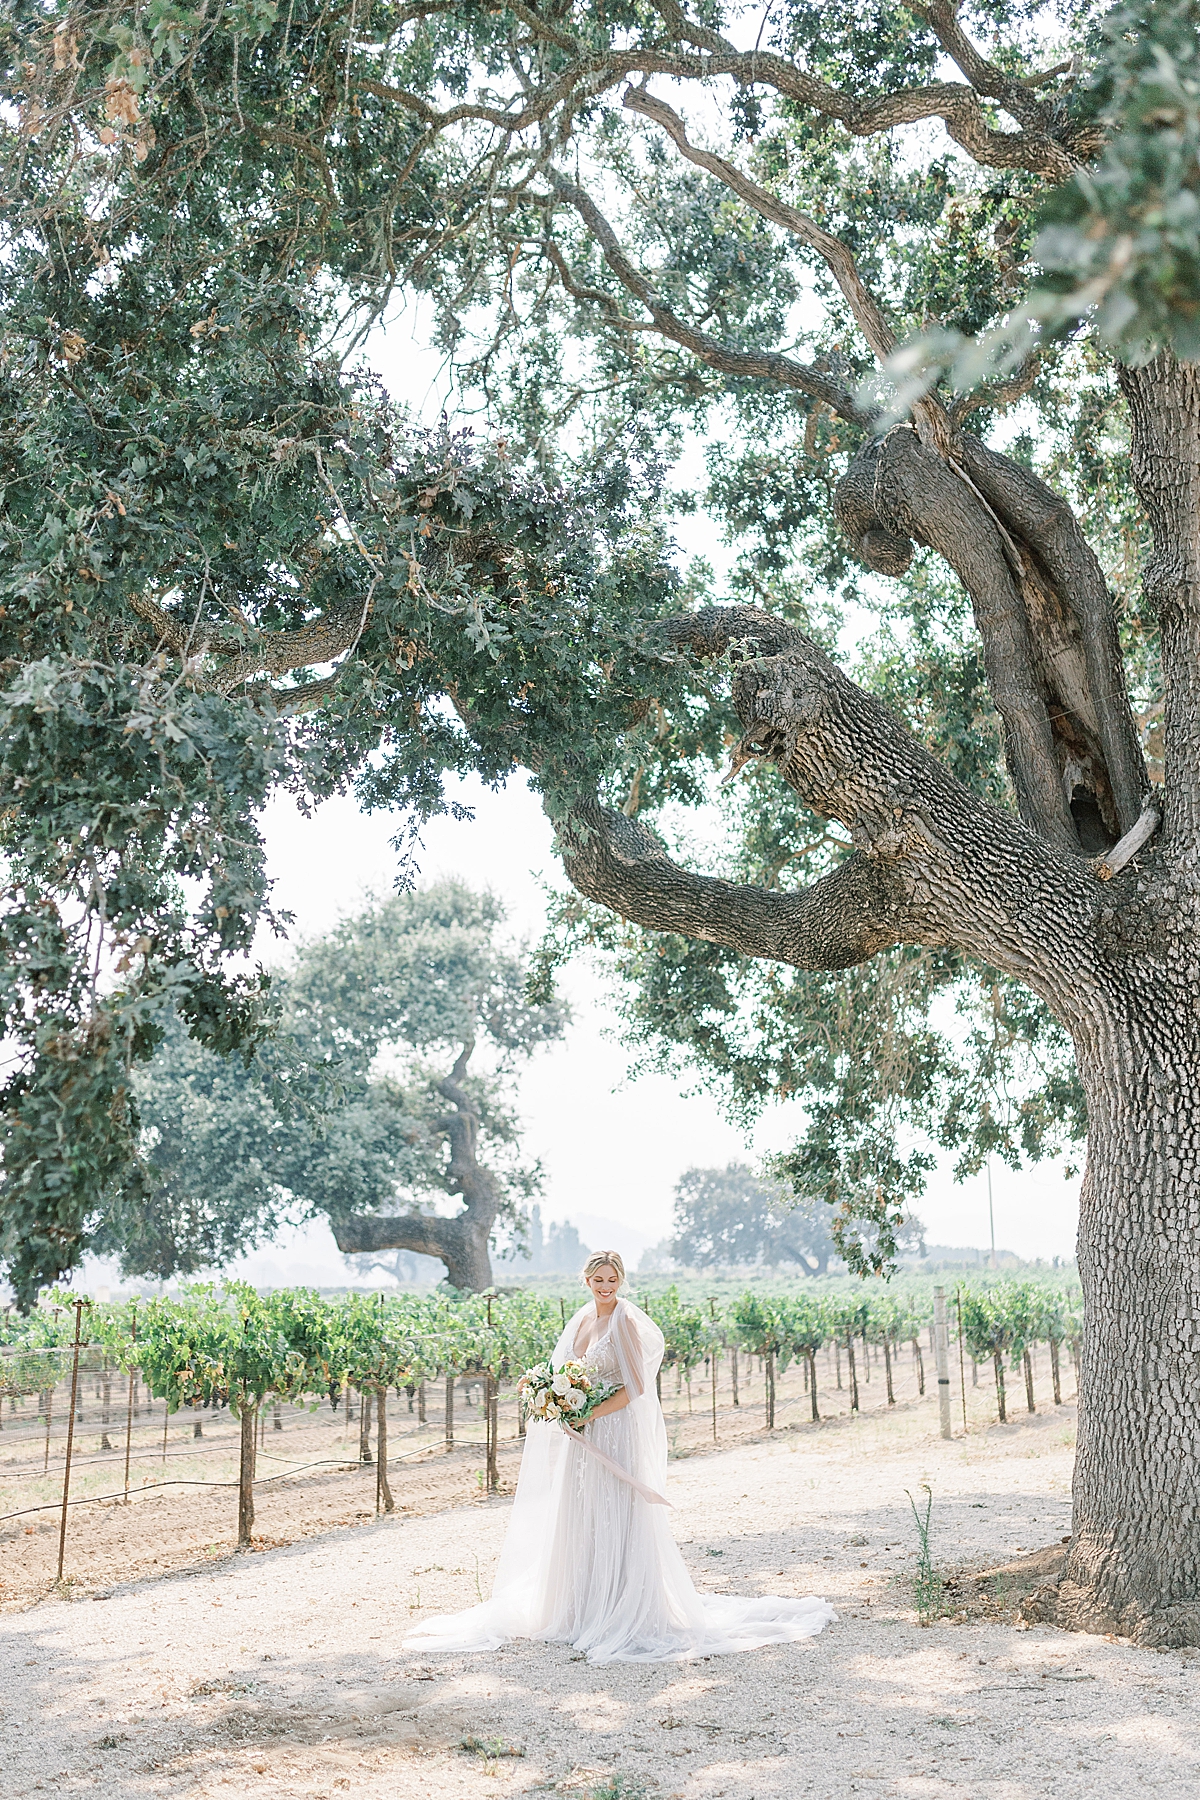 The bride holding her bouquet and standing under a large oak tree in front of rows and rows of vineyards.